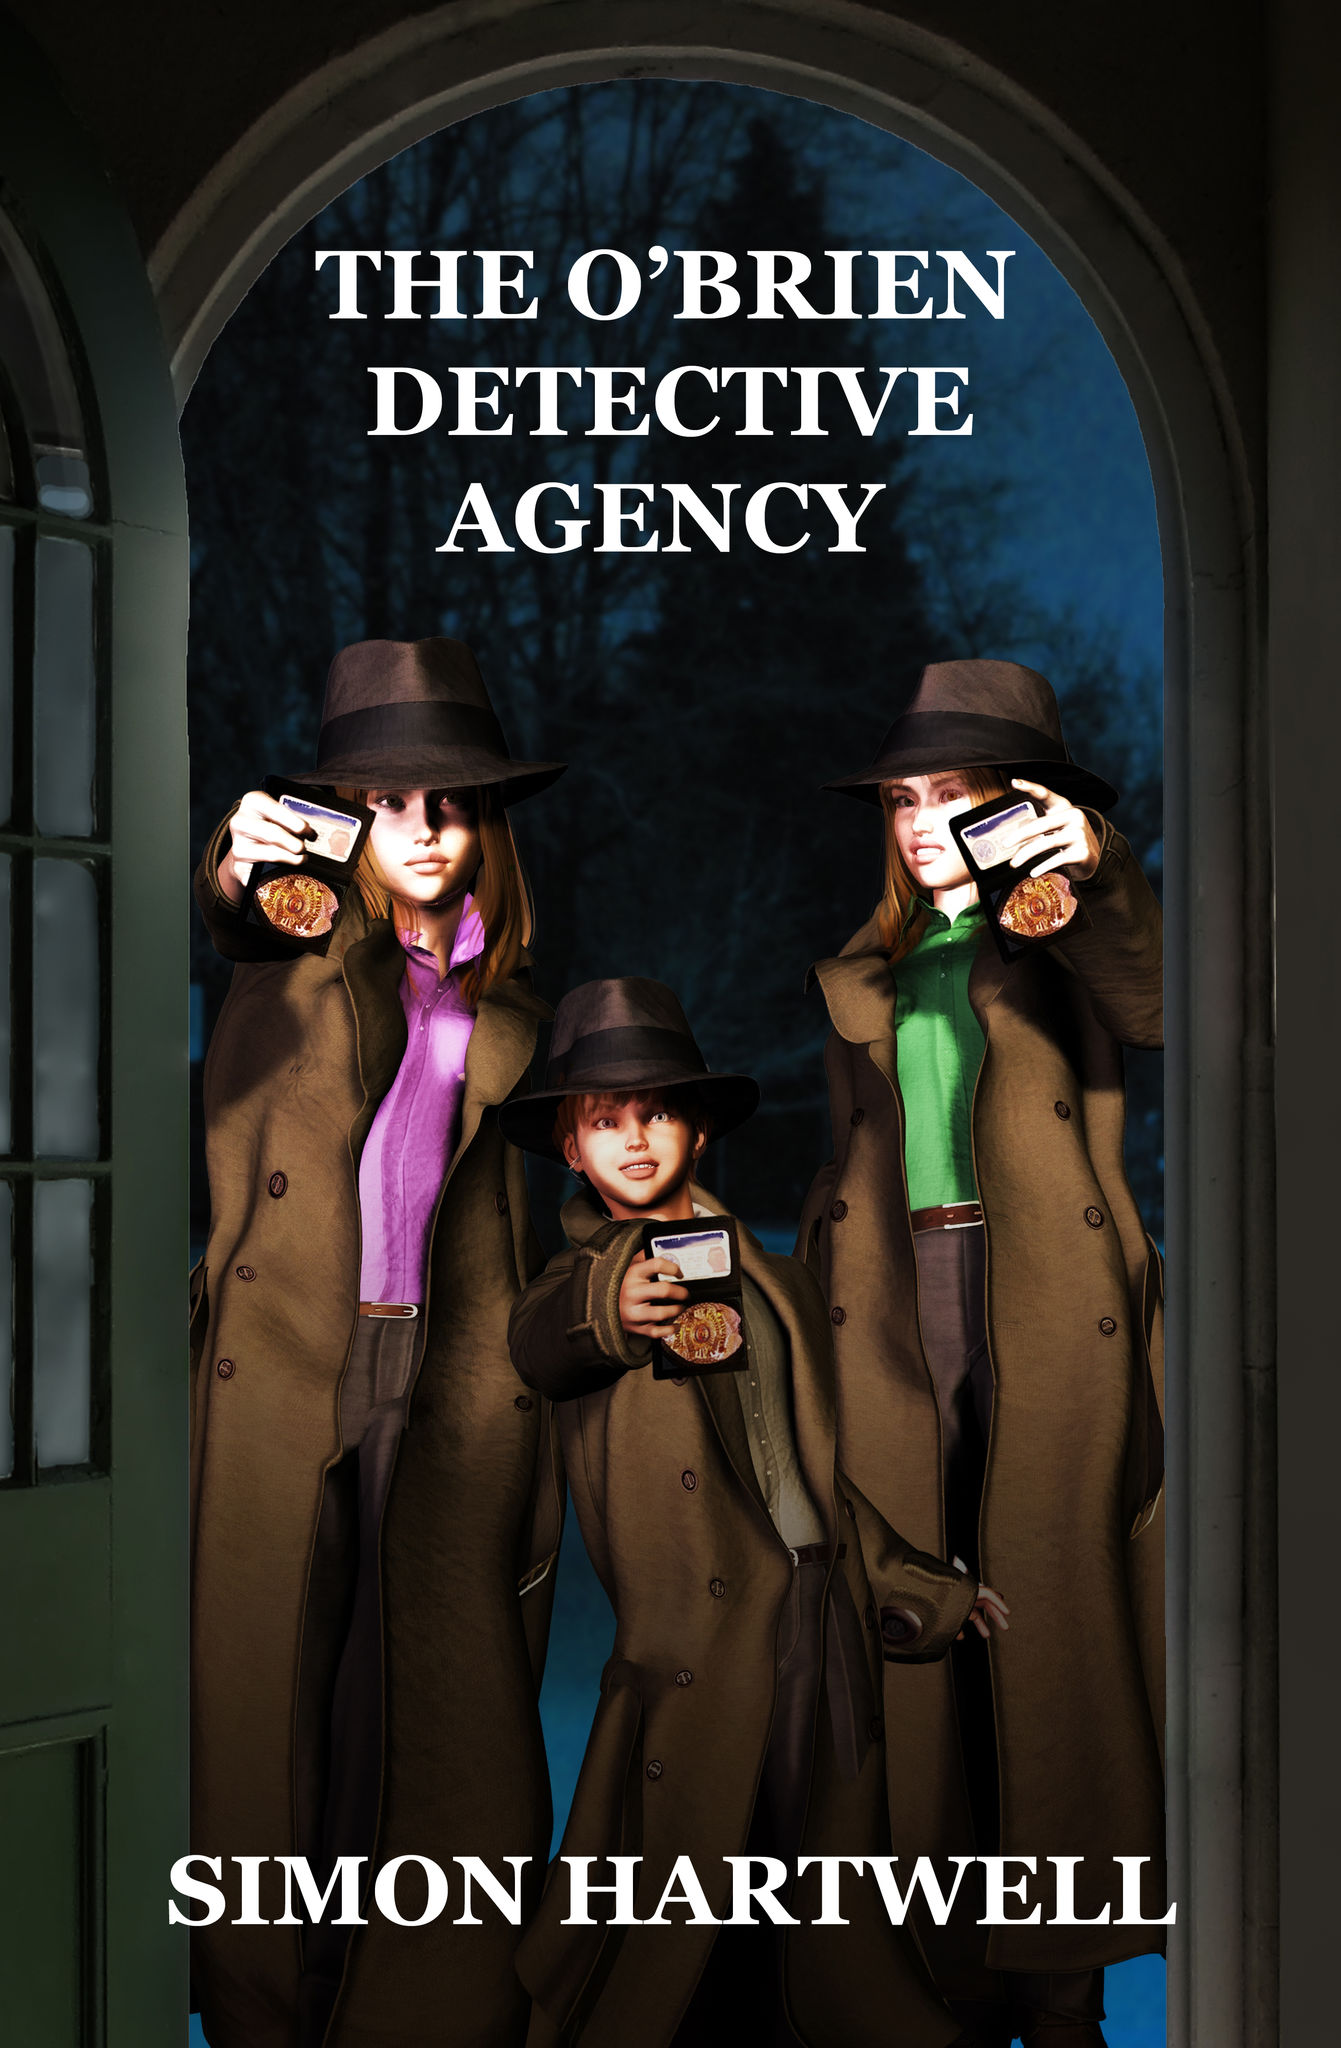 THE O'BRIEN DETECTIVE AGENCY